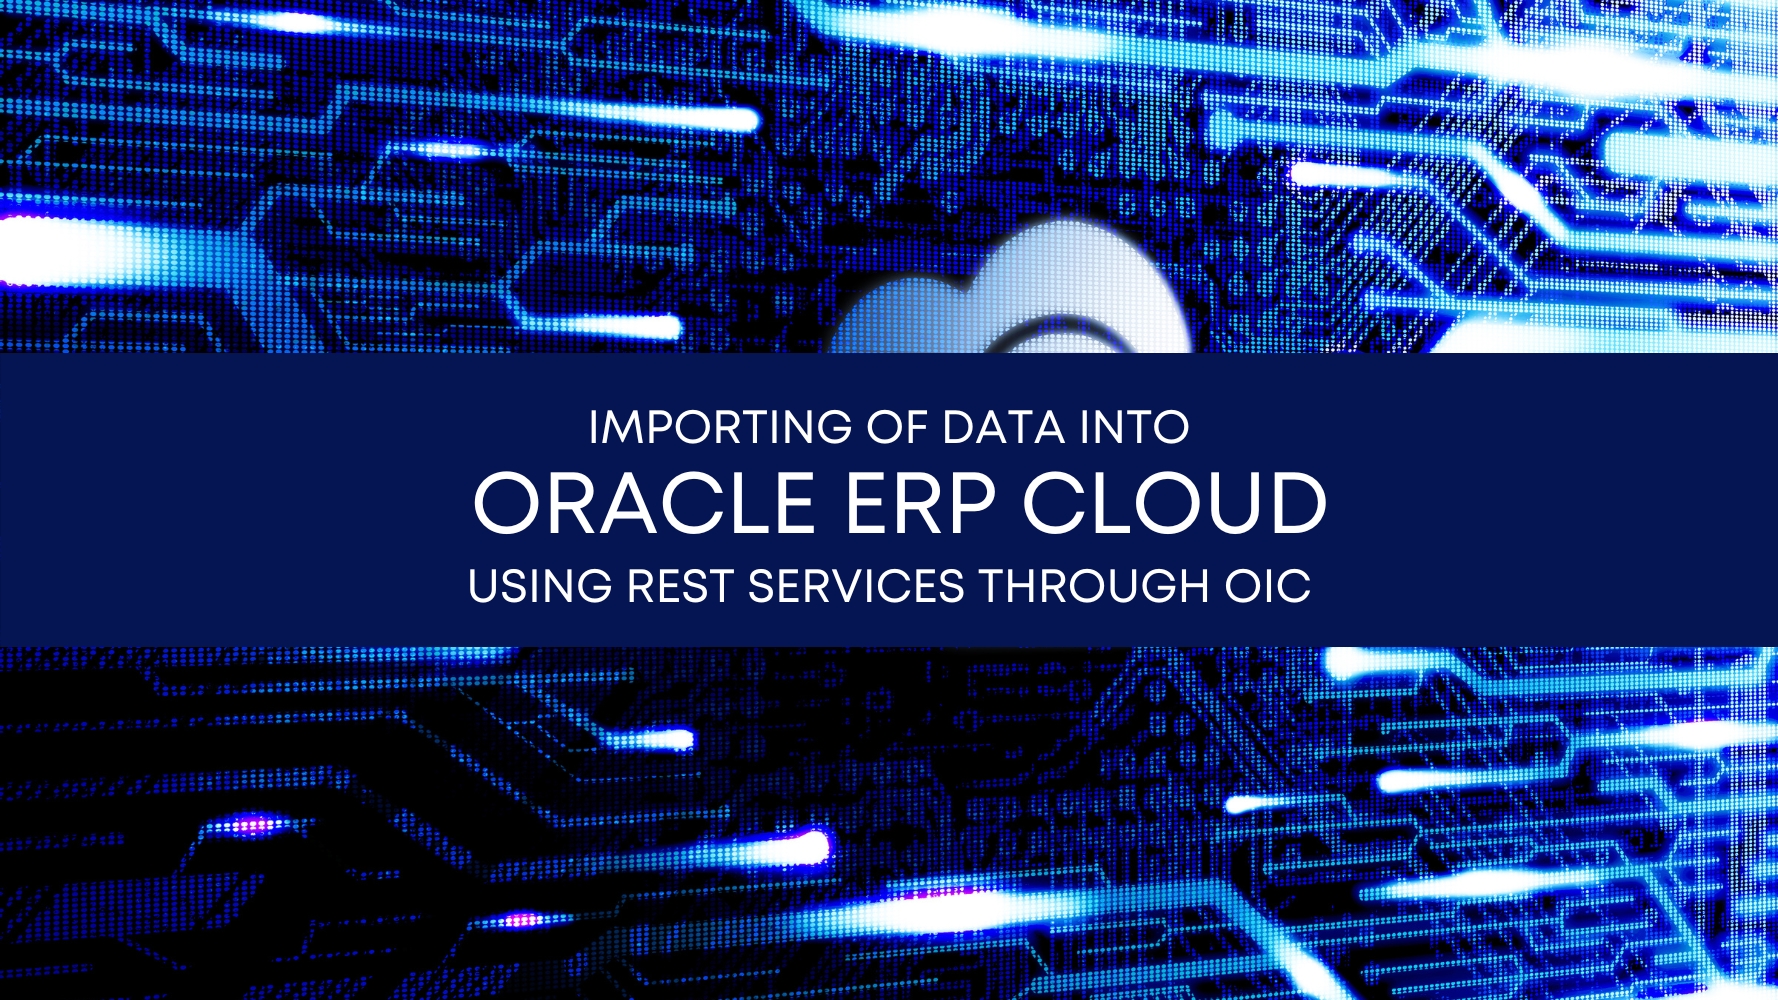 Importing-of-Data-into-Oracle-ERP-Cloud-using-REST-Services-through-OIC-1.jpg